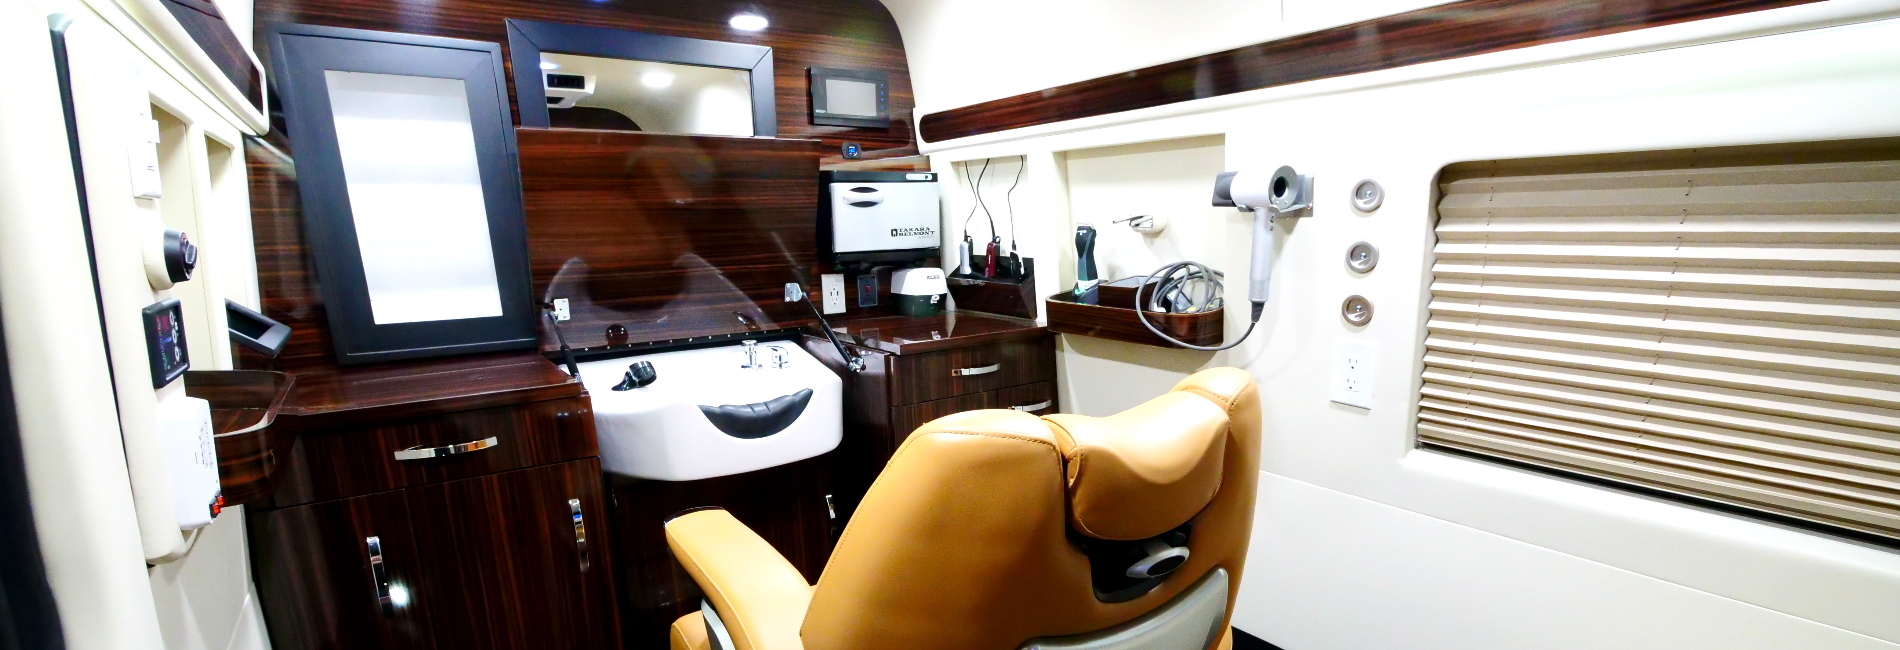 Fully realized mobile barbershop with a barber chair, full workstation, hot/cold water, built-in vacuum, and more!